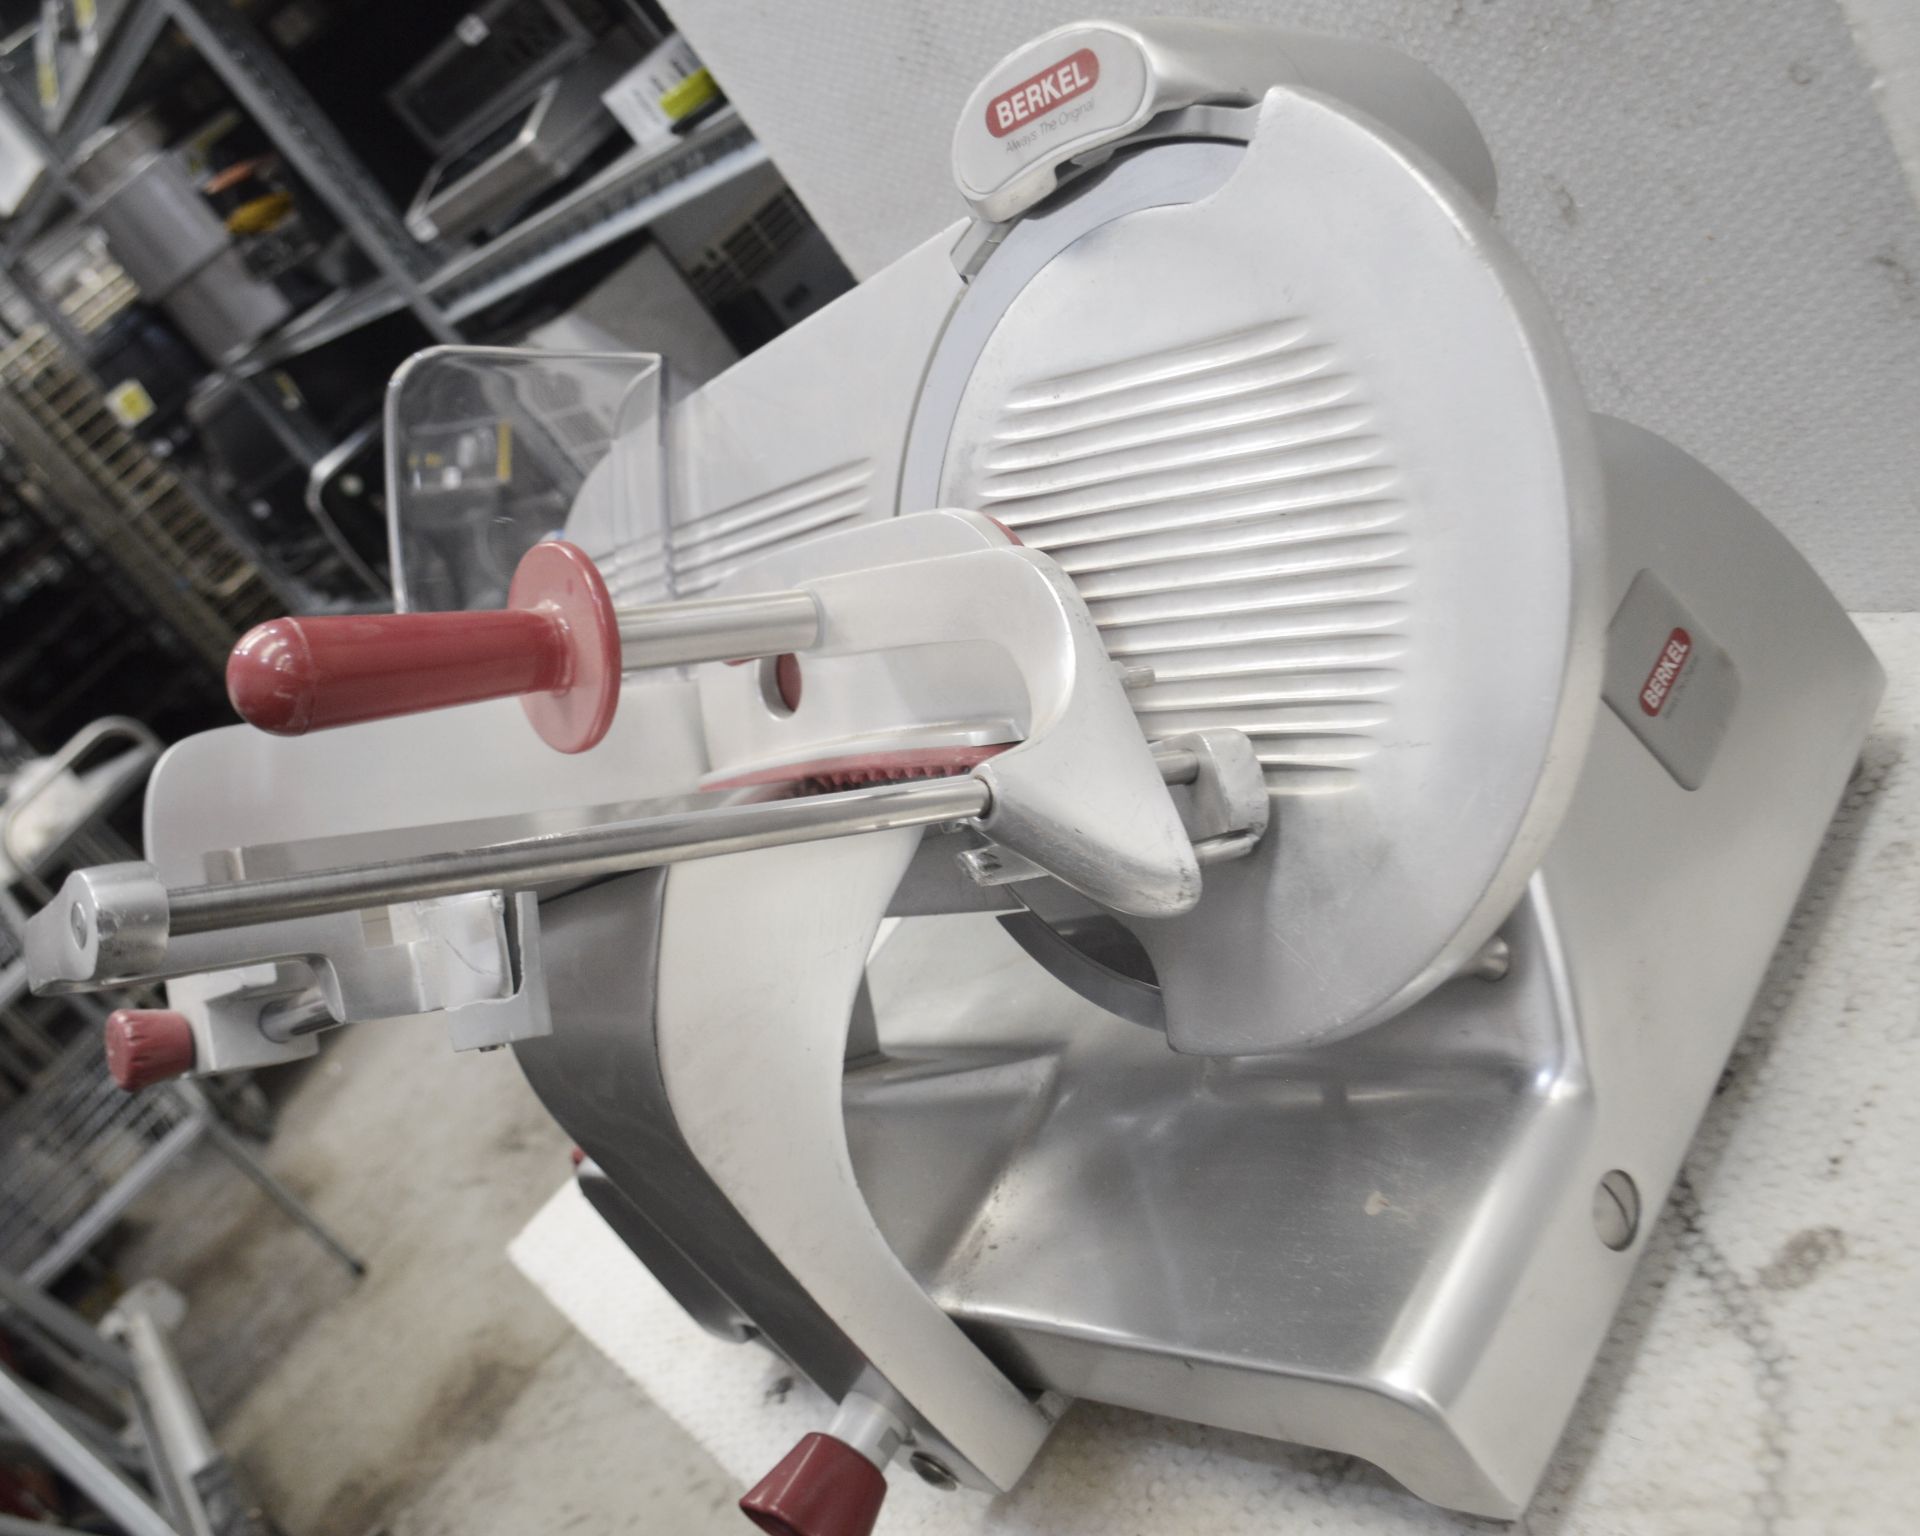 1 x Berkel 12" Commercial Cooked Meat / Bacon Slicer - 220-240v - Model BSPGL04011A0F - Approx - Image 3 of 4